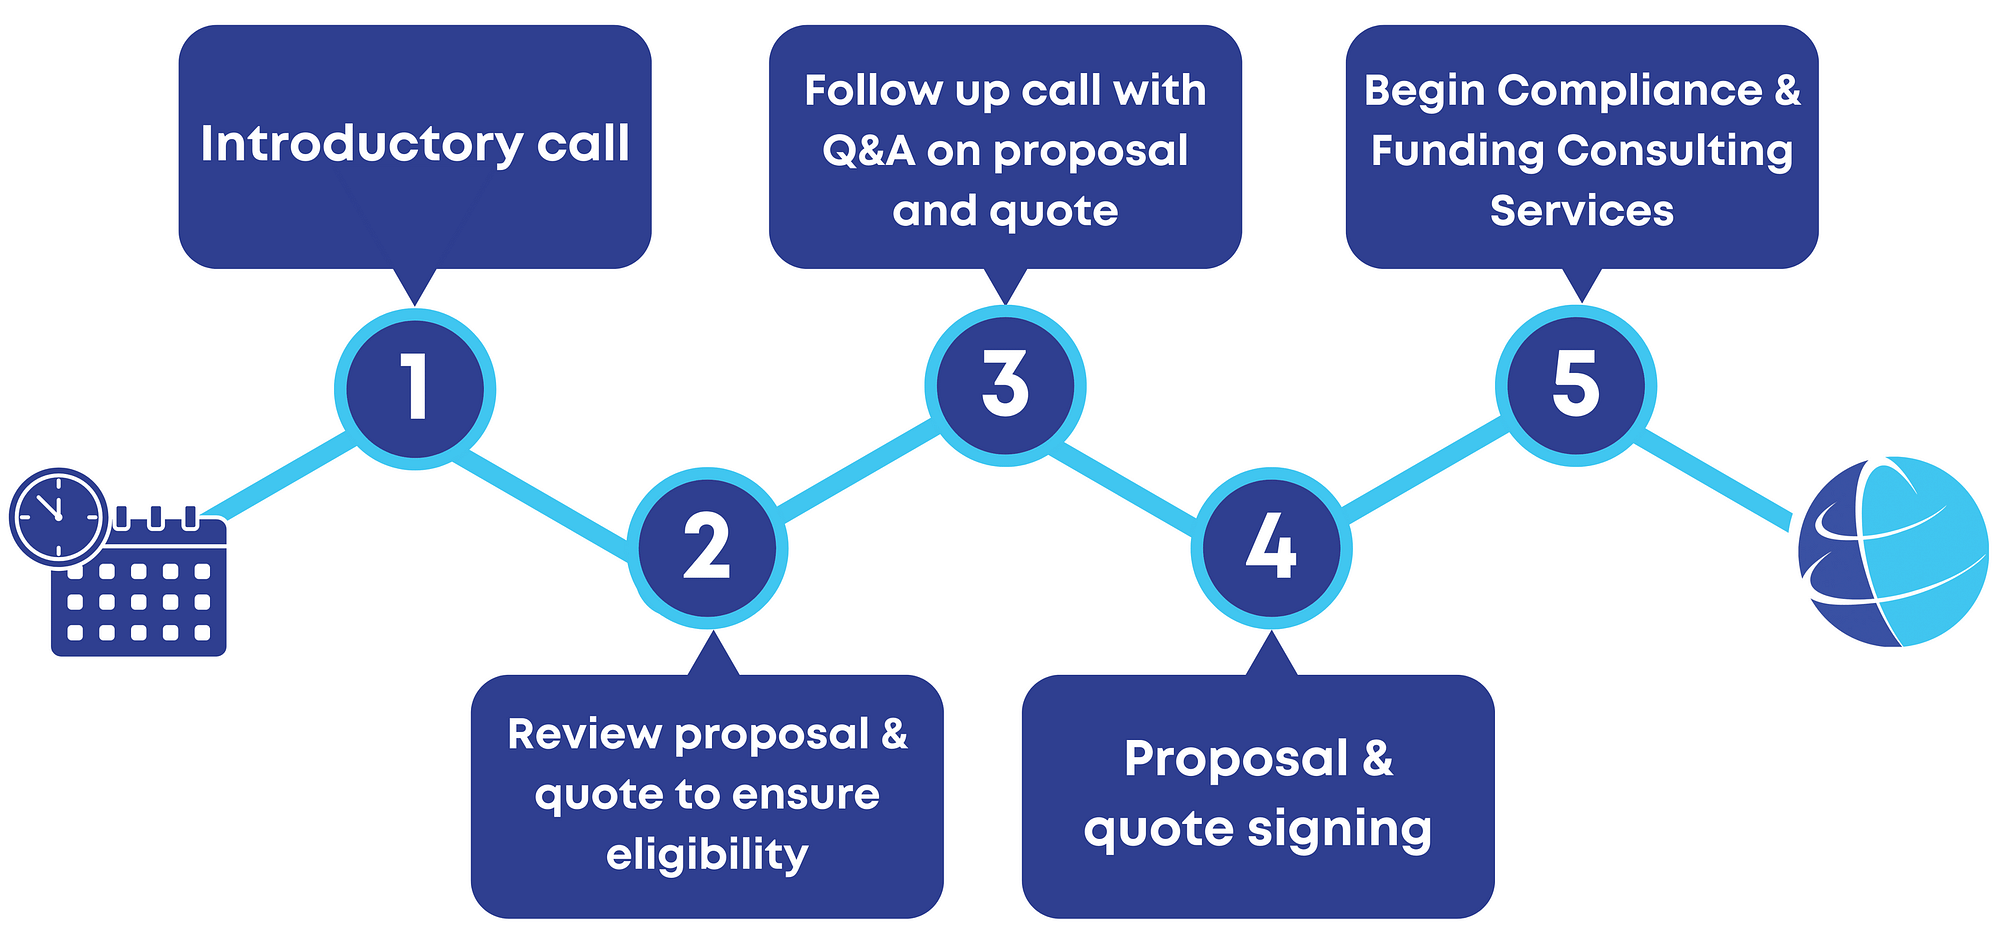 Onboarding Process: Call, Review Proposal, Sign, and Begin Our Services